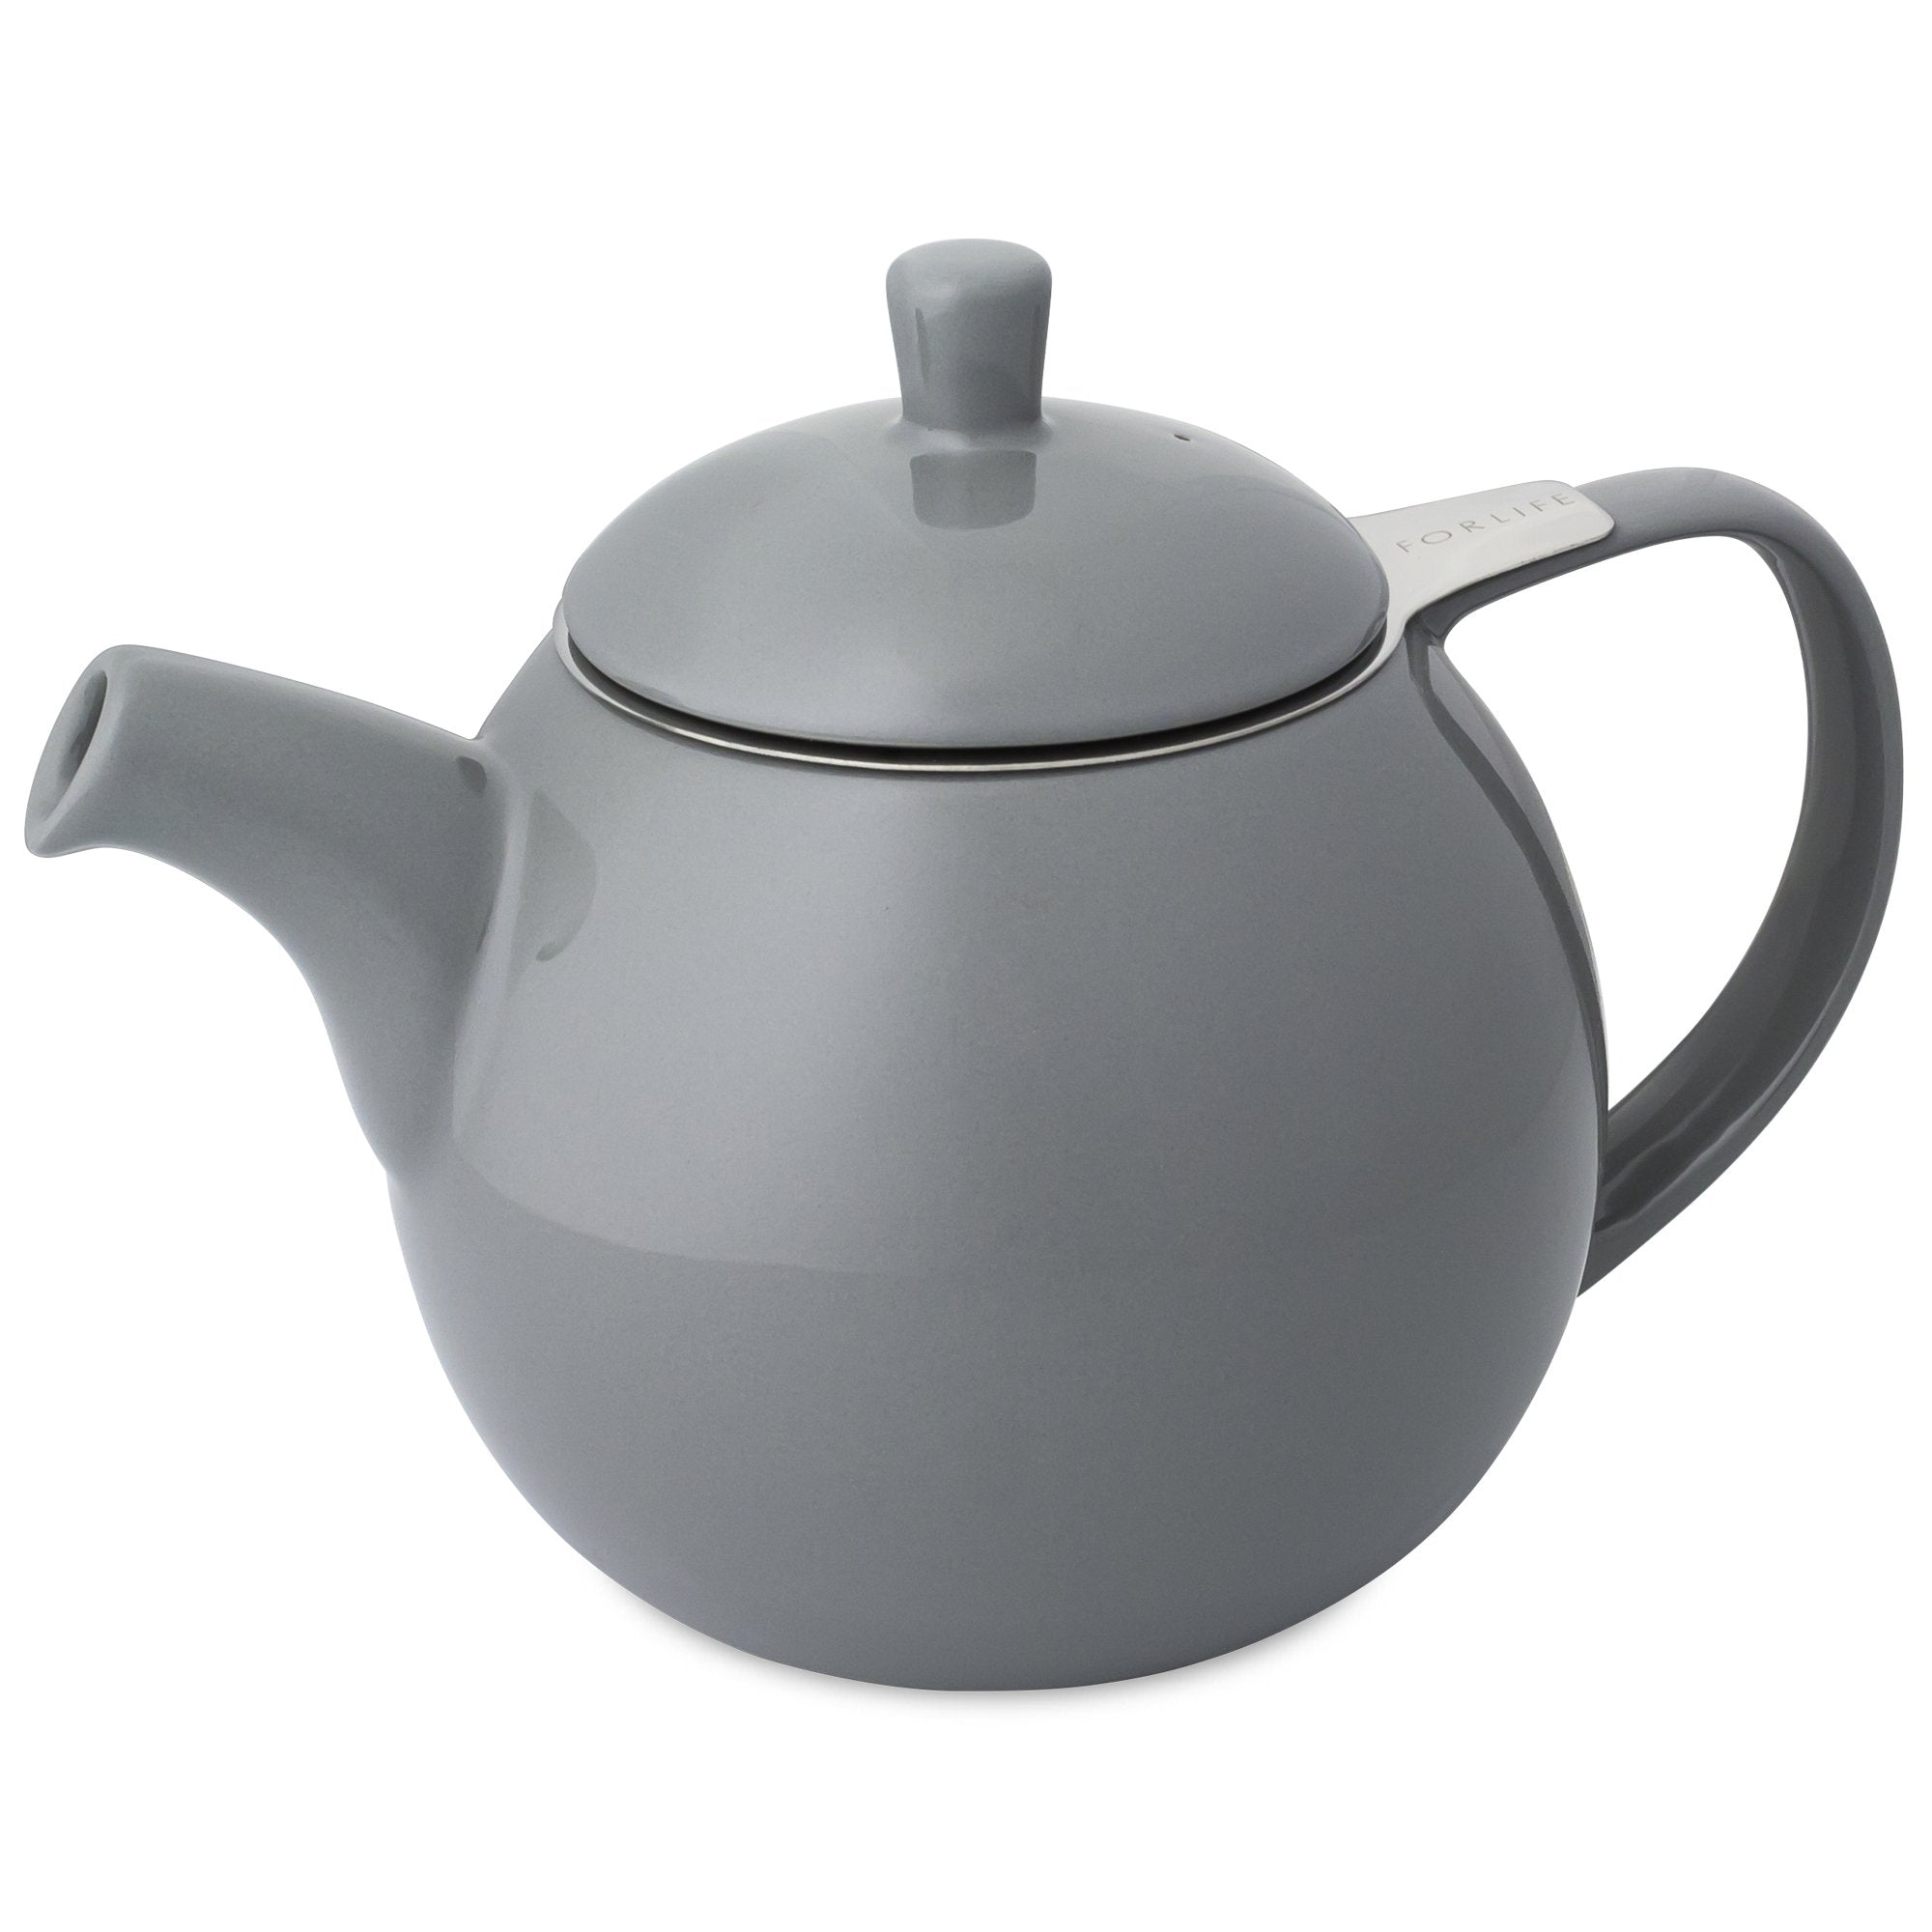 TeaLula 24 oz Curve sphere gray Teapot glossy surface finish and attached lid